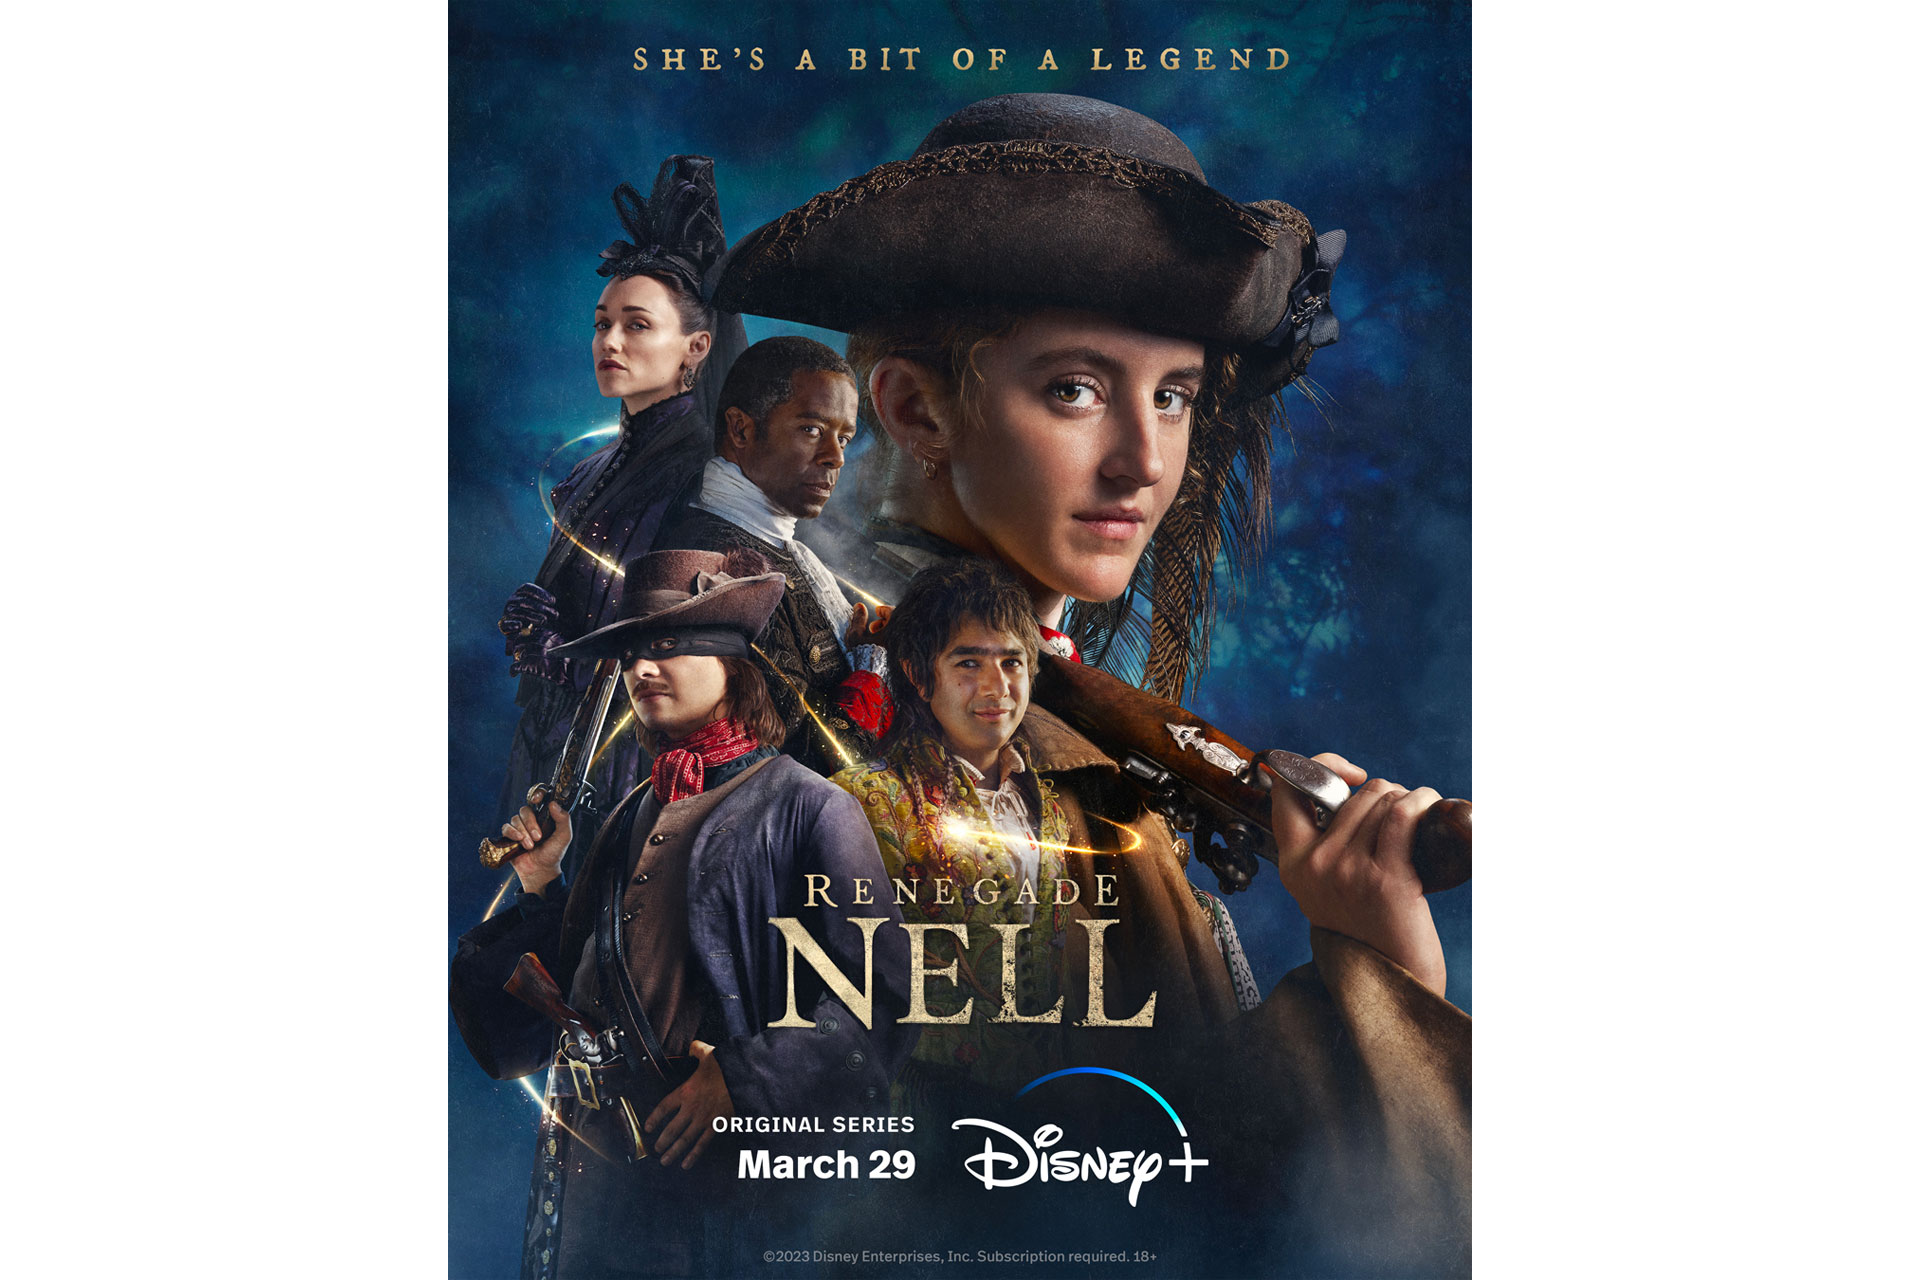 The poster for Disney Plus's Ballad of Renegade Nell